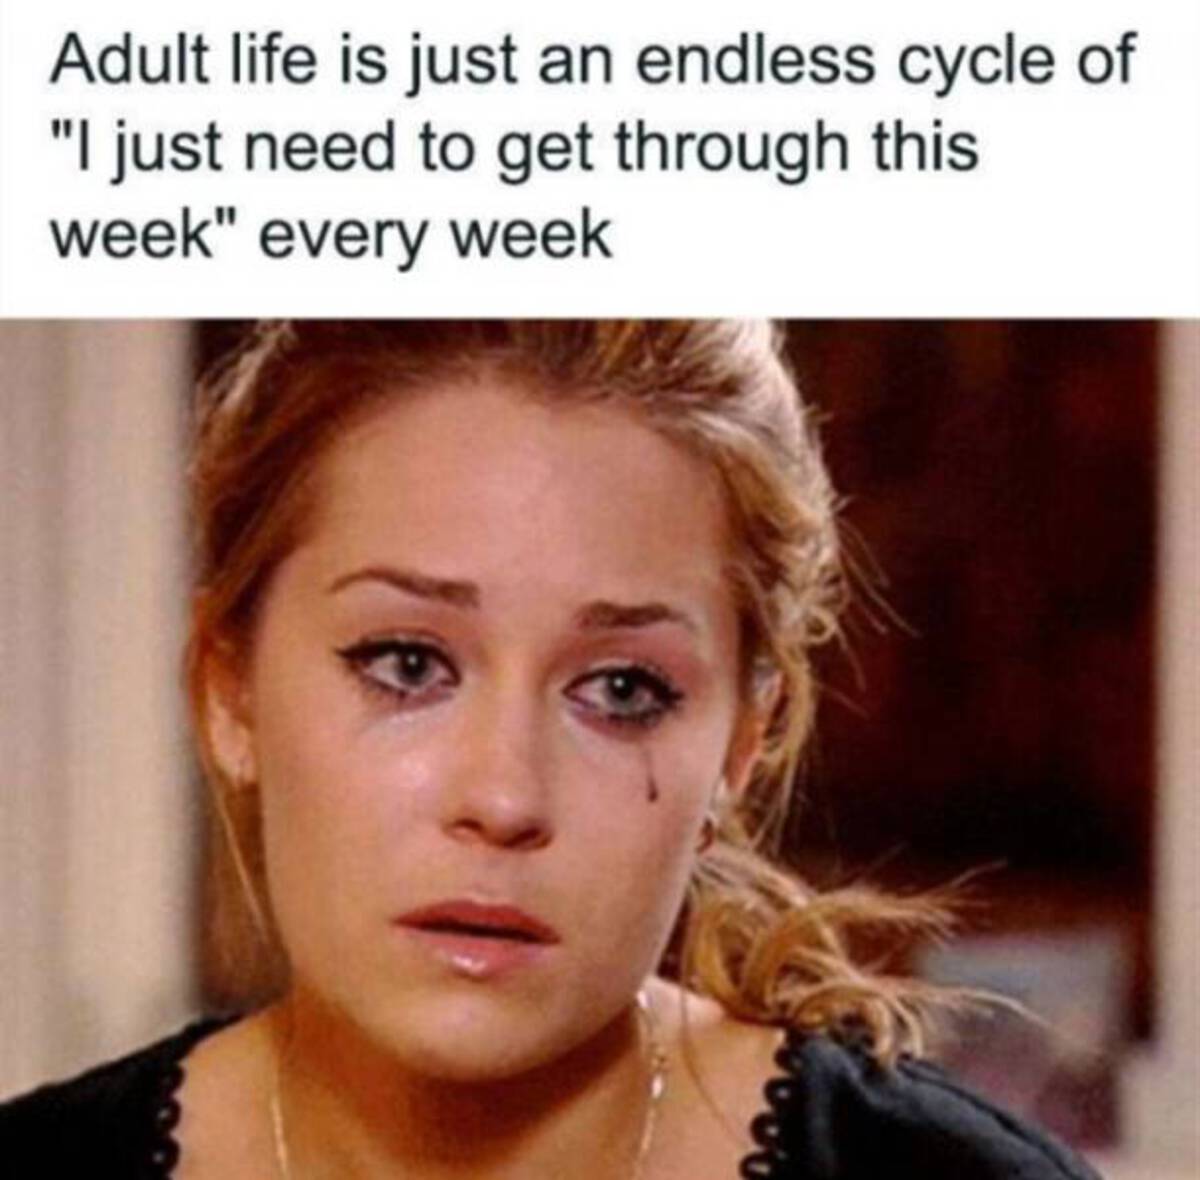 lauren conrad crying gif - Adult life is just an endless cycle of "I just need to get through this week" every week